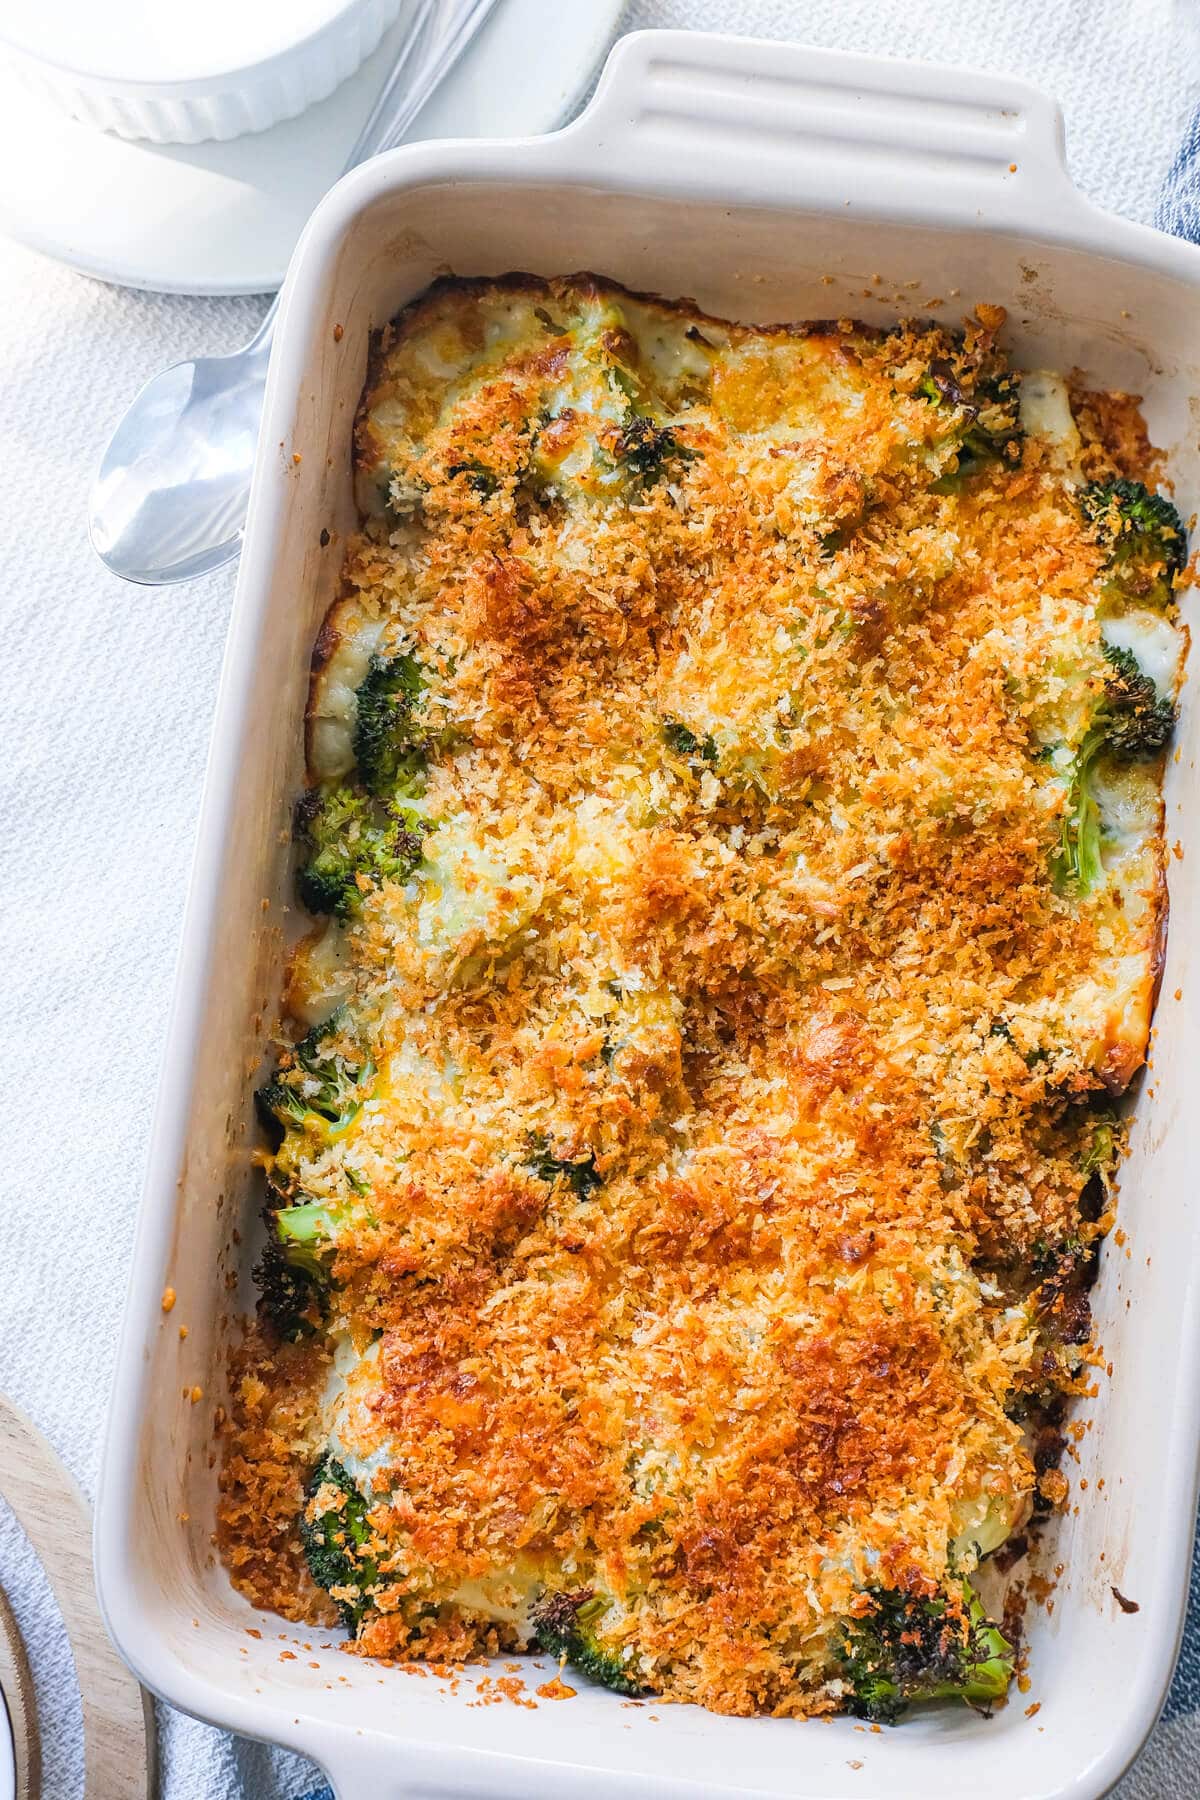 Perfectly baked broccoli gratin into golden brown. 